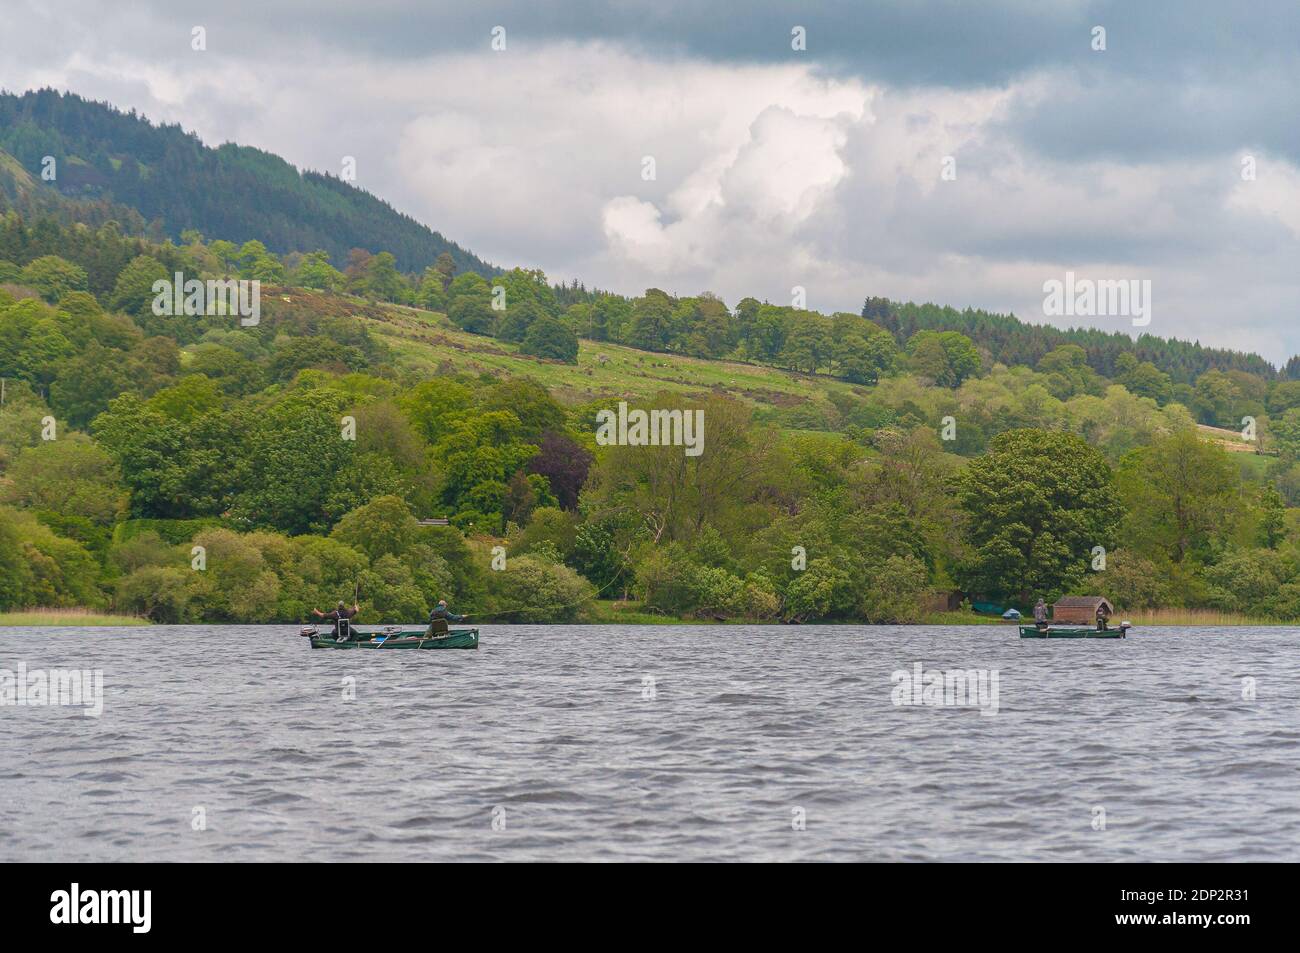 Boats with fishermen in Lake of Menteith, Scotland. Concept: Scottish landscapes, Scottisch lakes Stock Photo